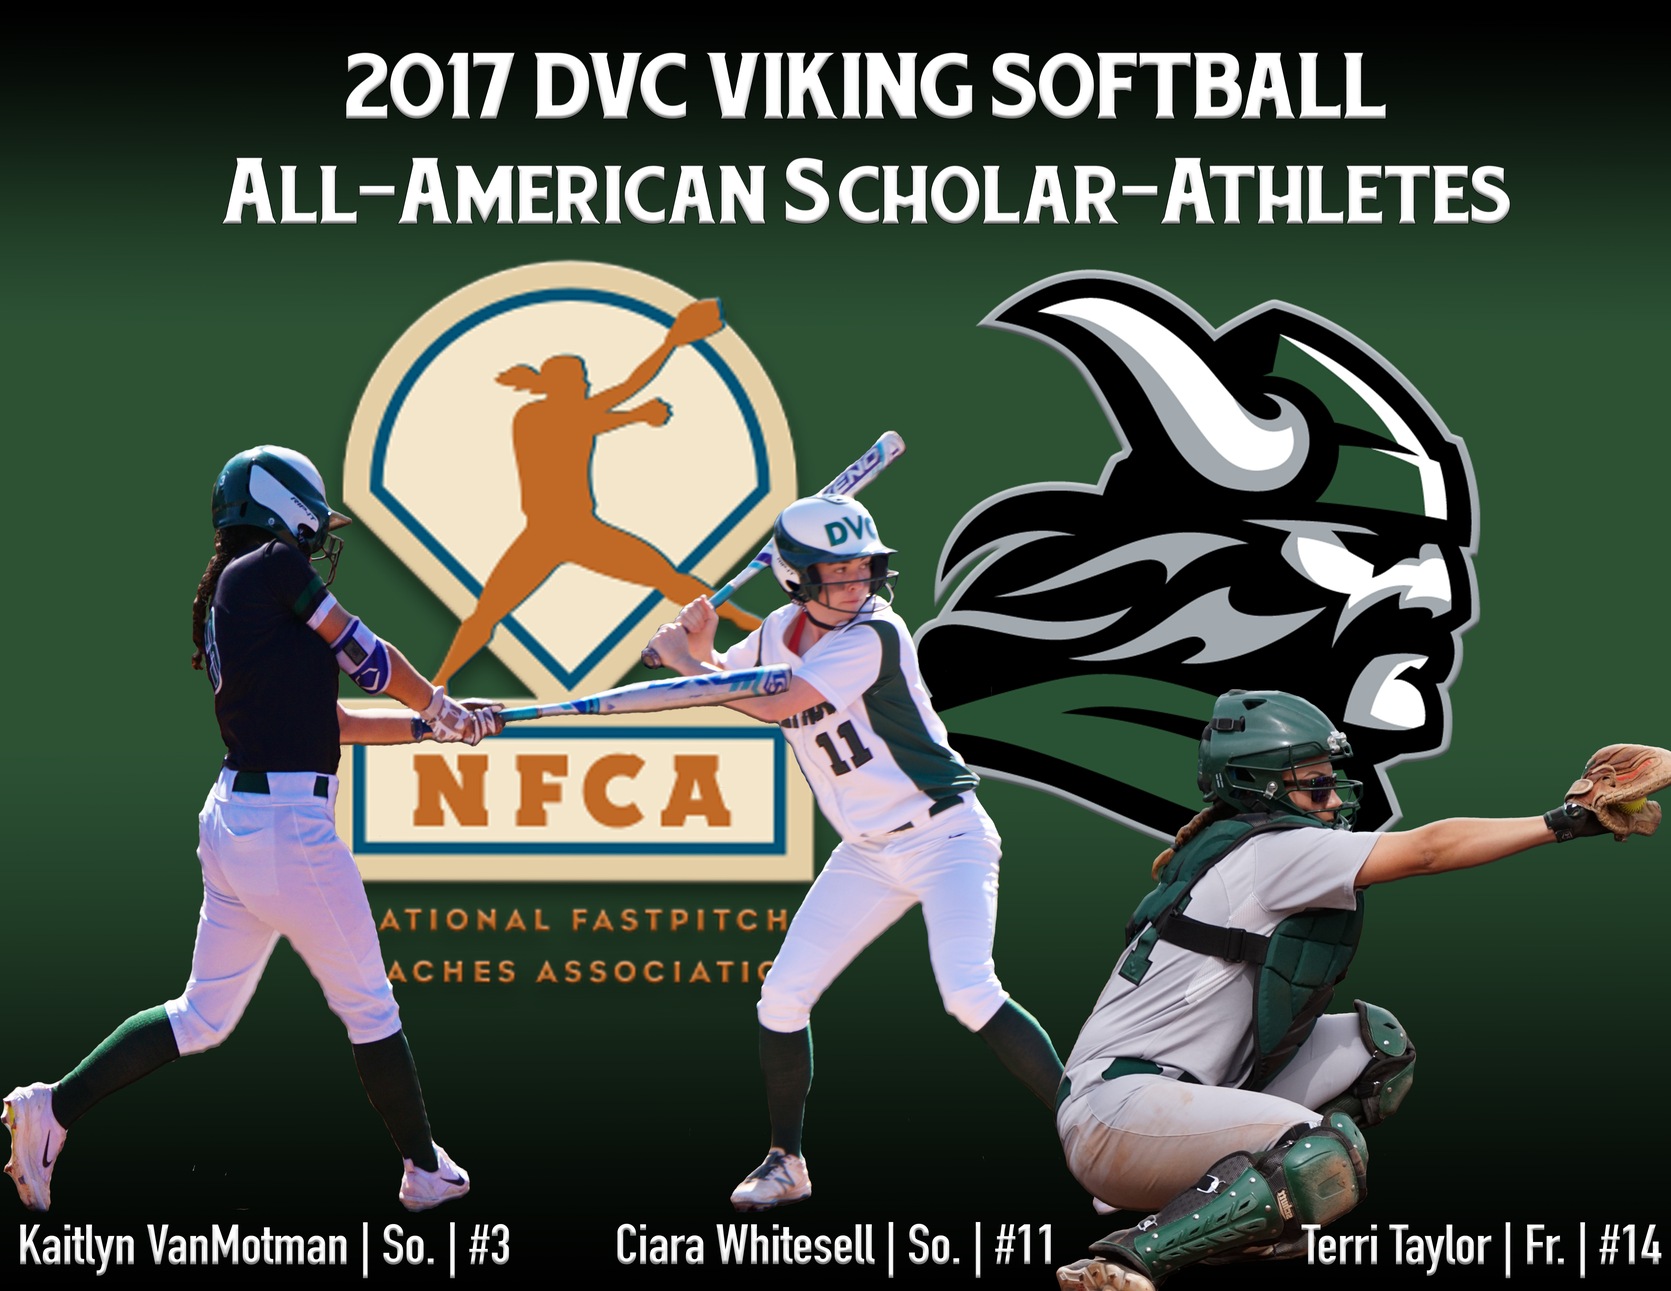 NFCA Honors 3 Vikings with All-America Scholar Athlete Award